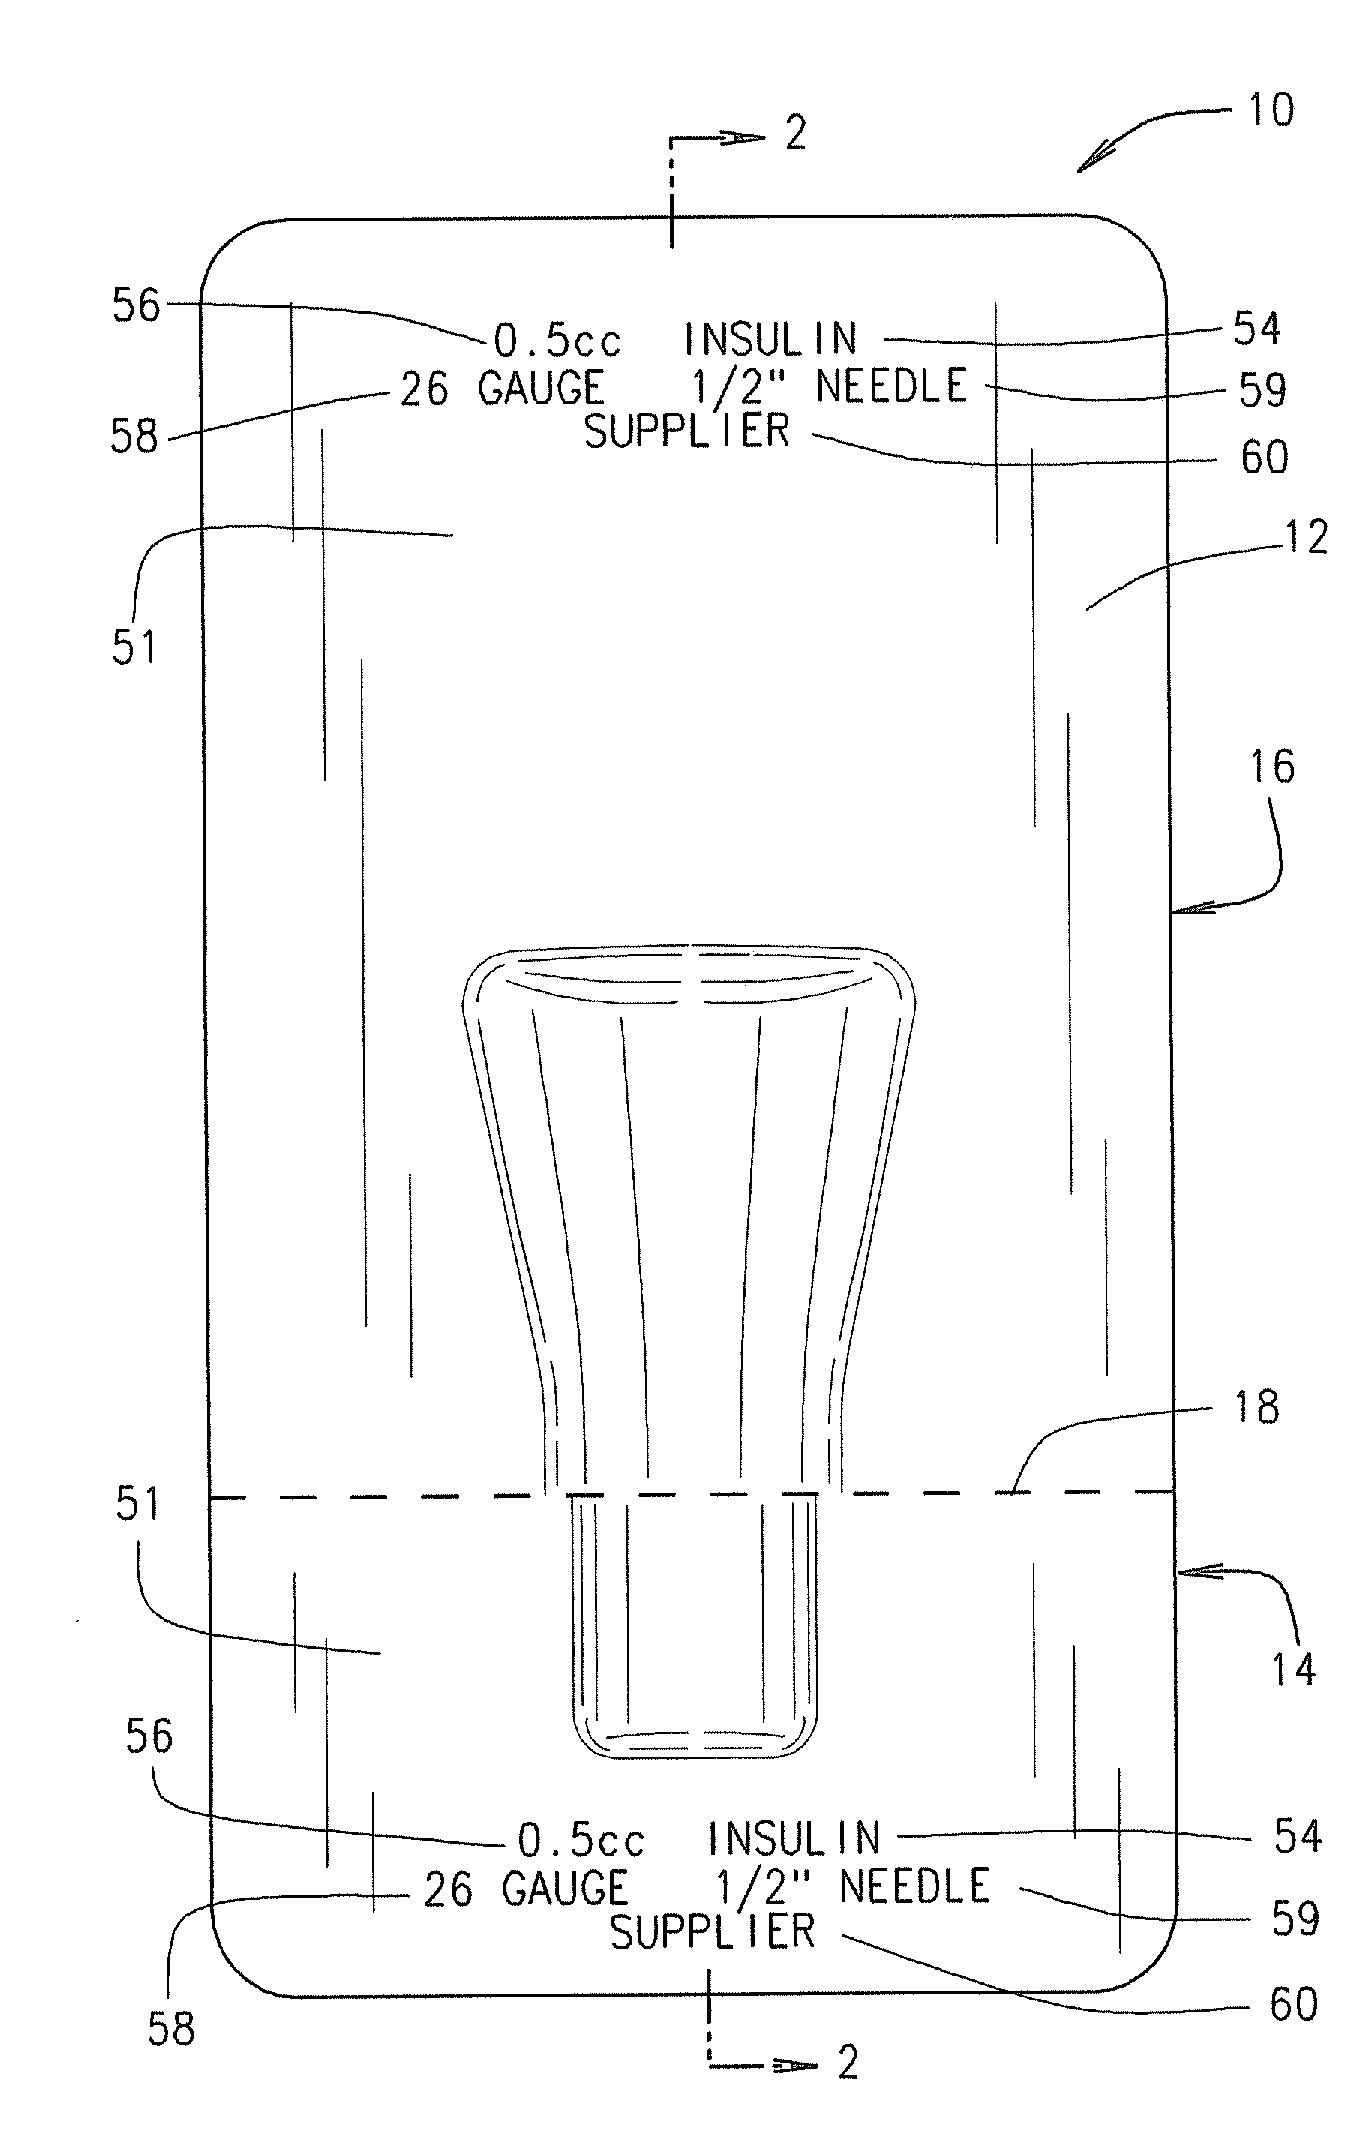 Closure container for single dose disposable pharmaceutical delivery system